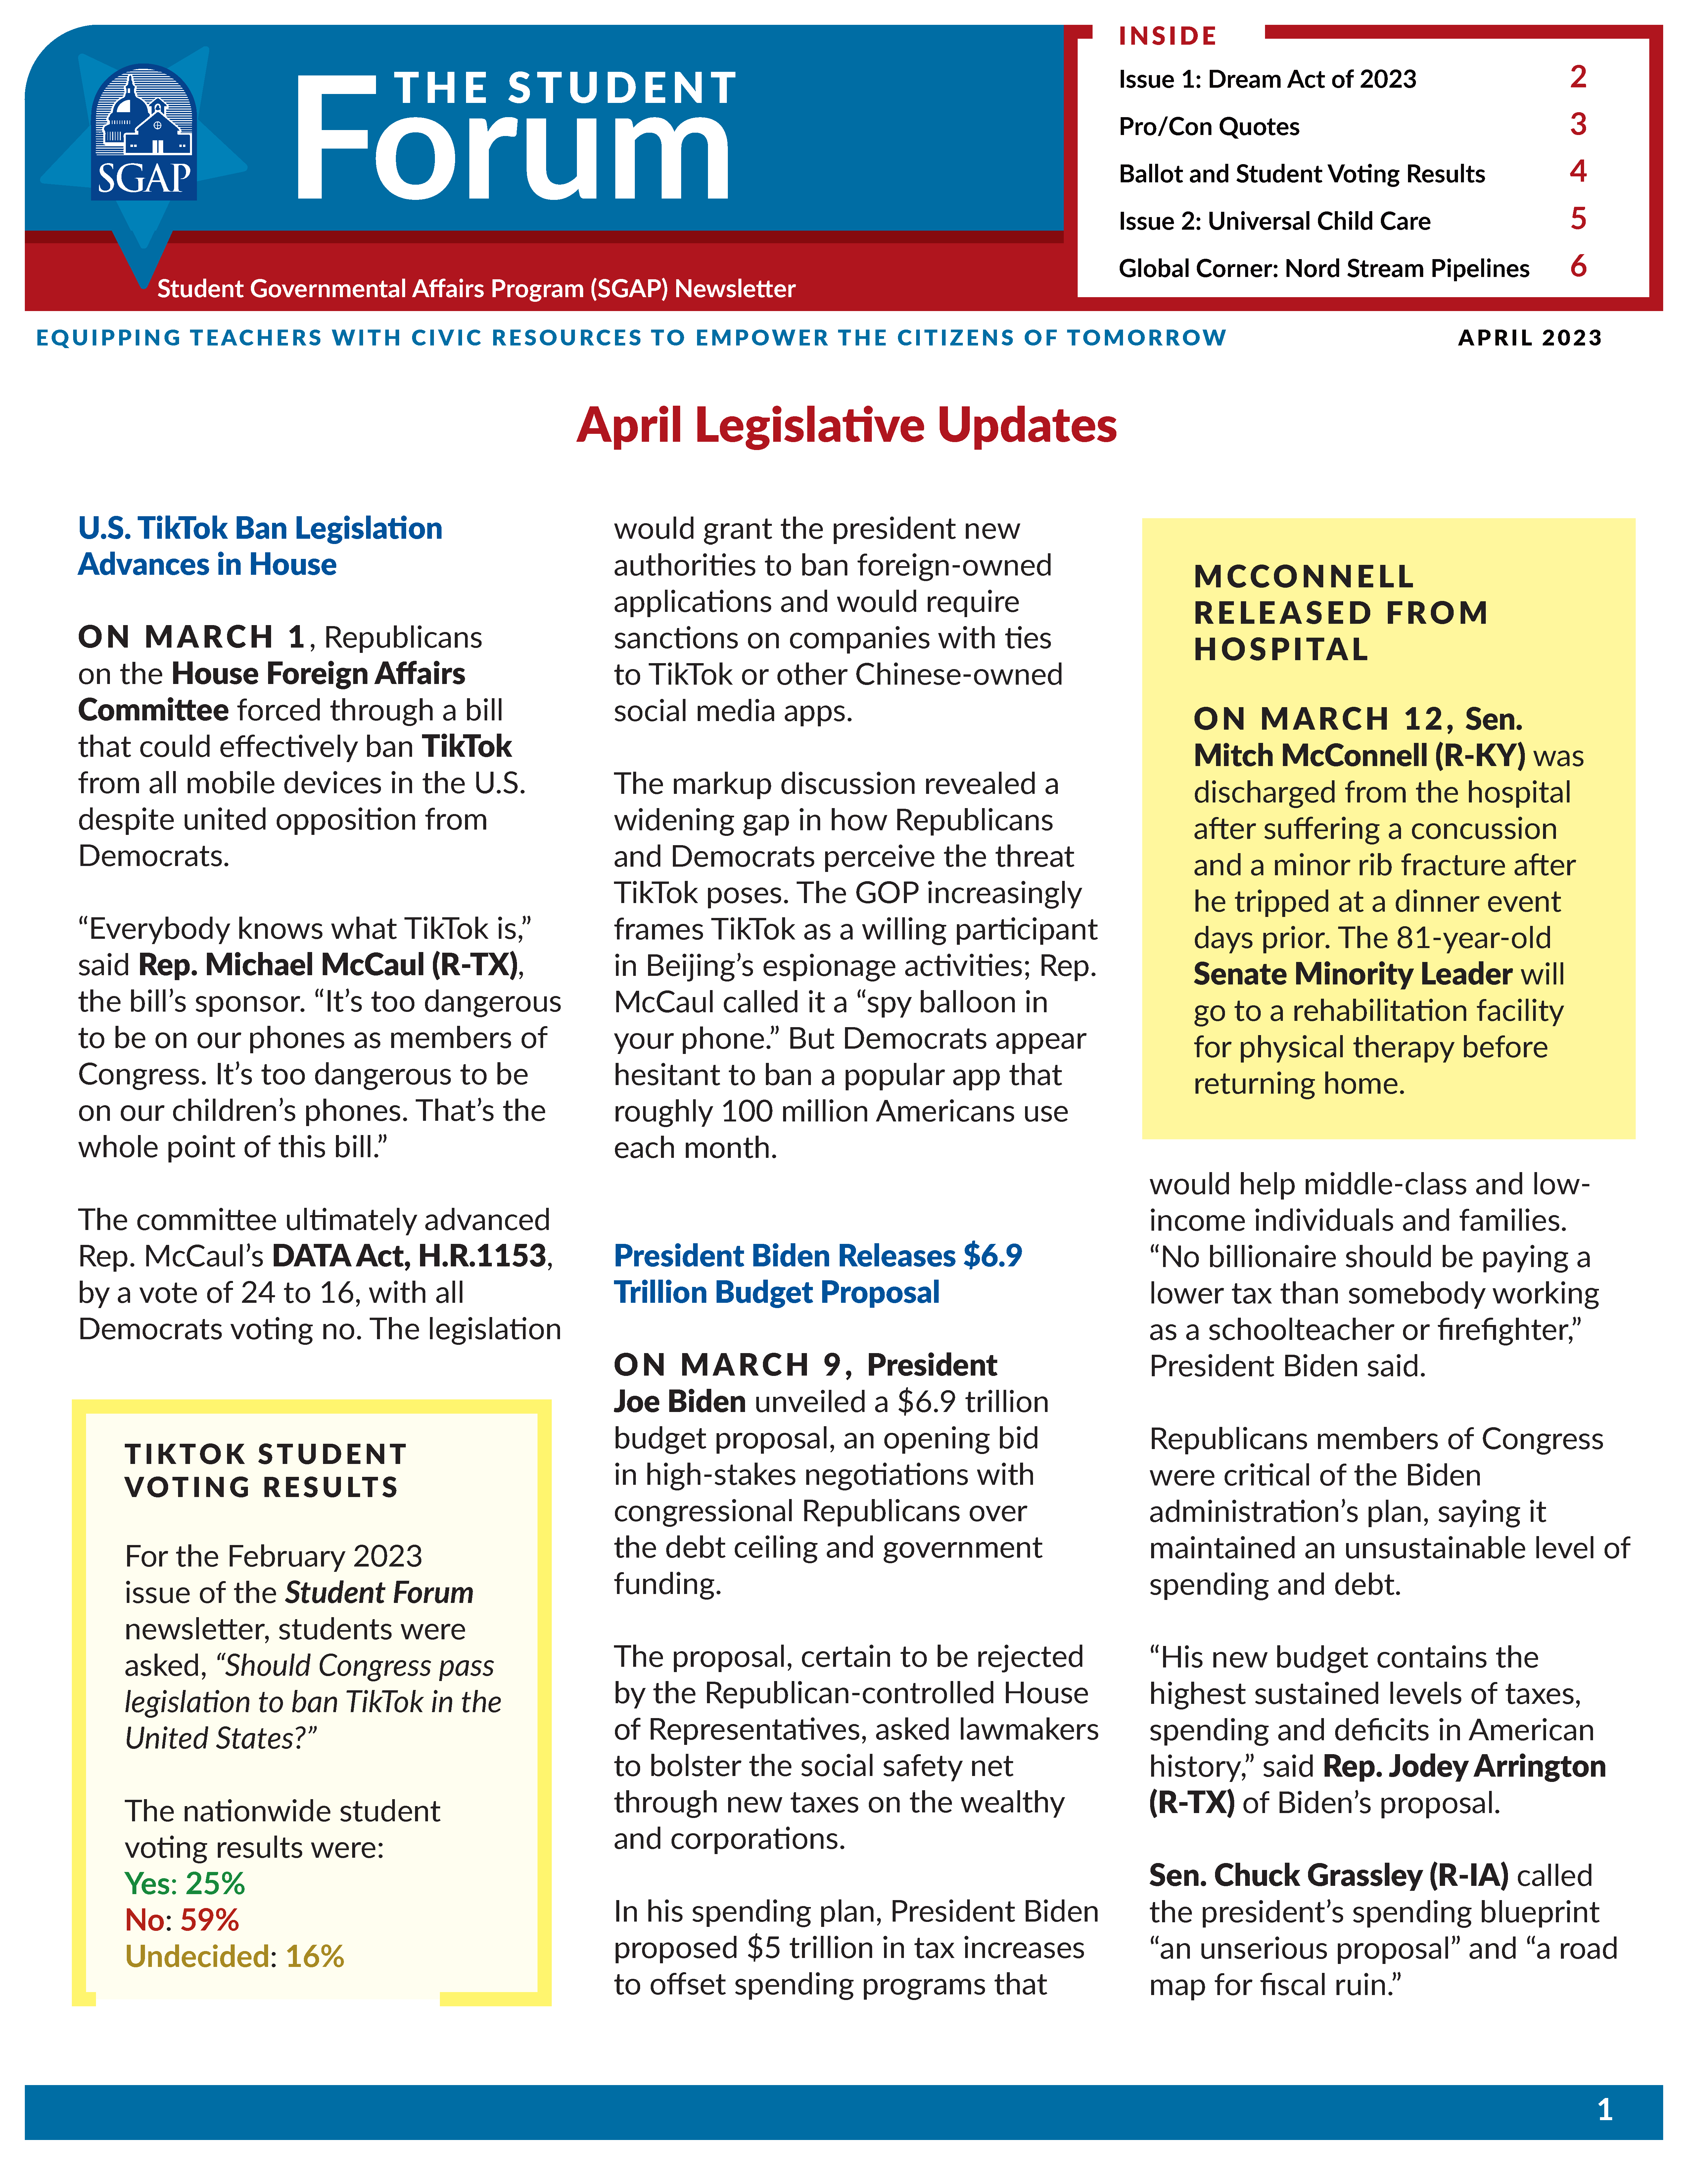 SGAP Newsletter for April 2023 (Dream Act + Universal Child Care)